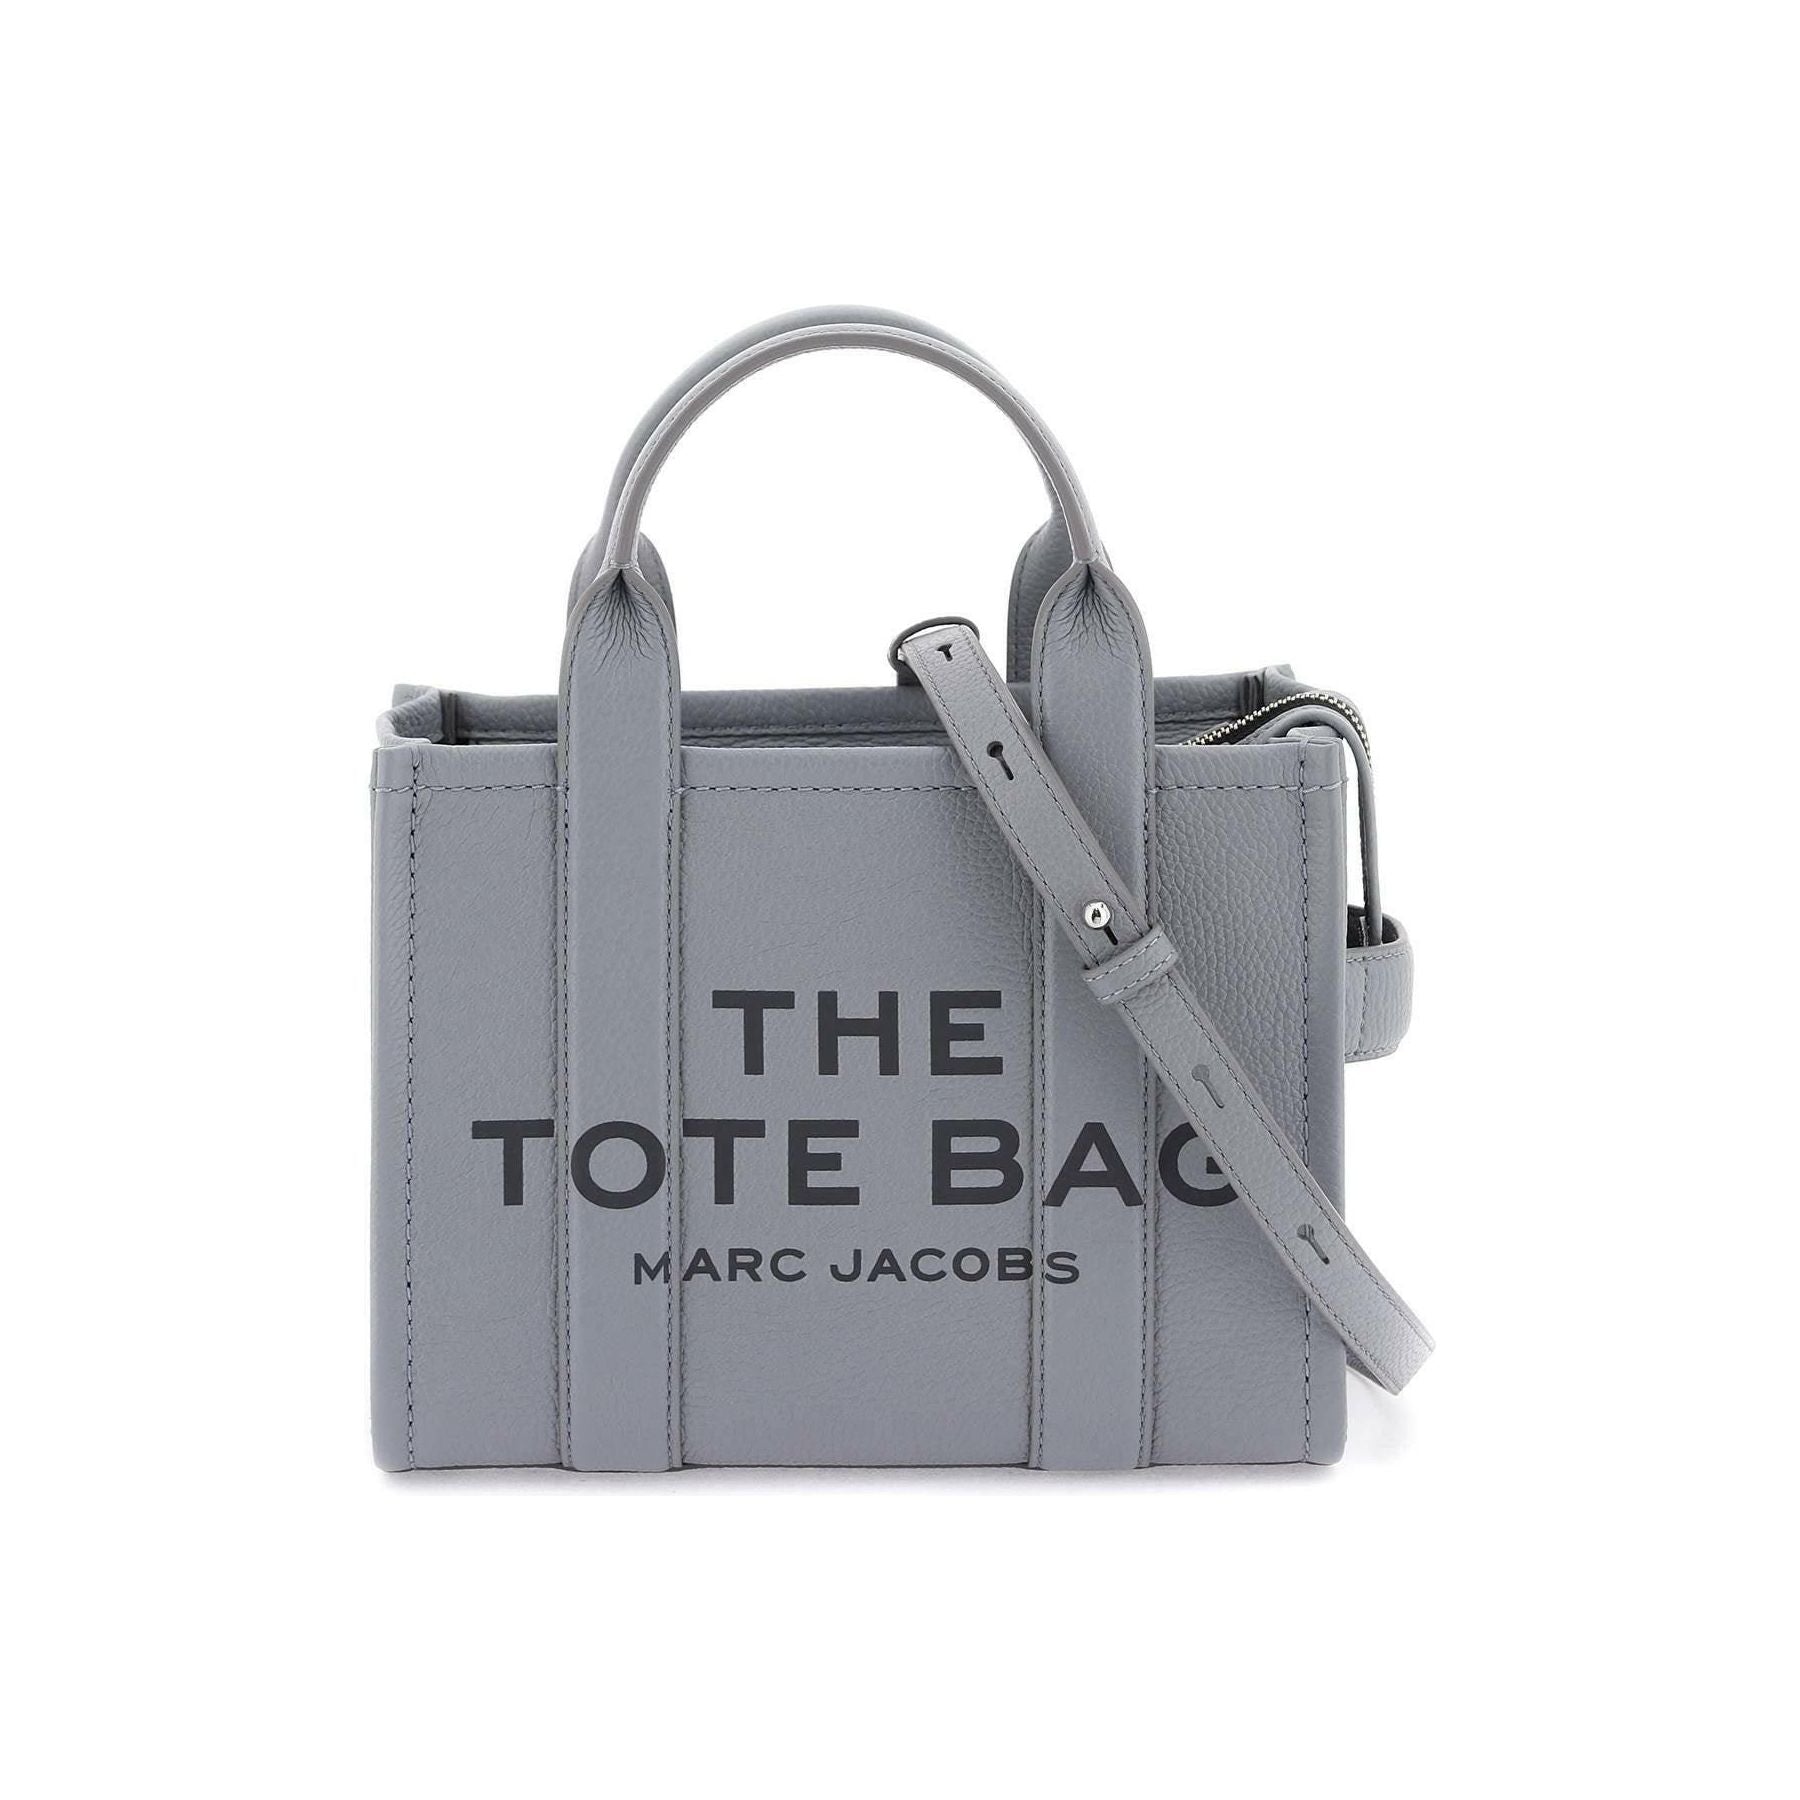 Wolf Grey The Leather Small Tote Bag MARC JACOBS JOHN JULIA.